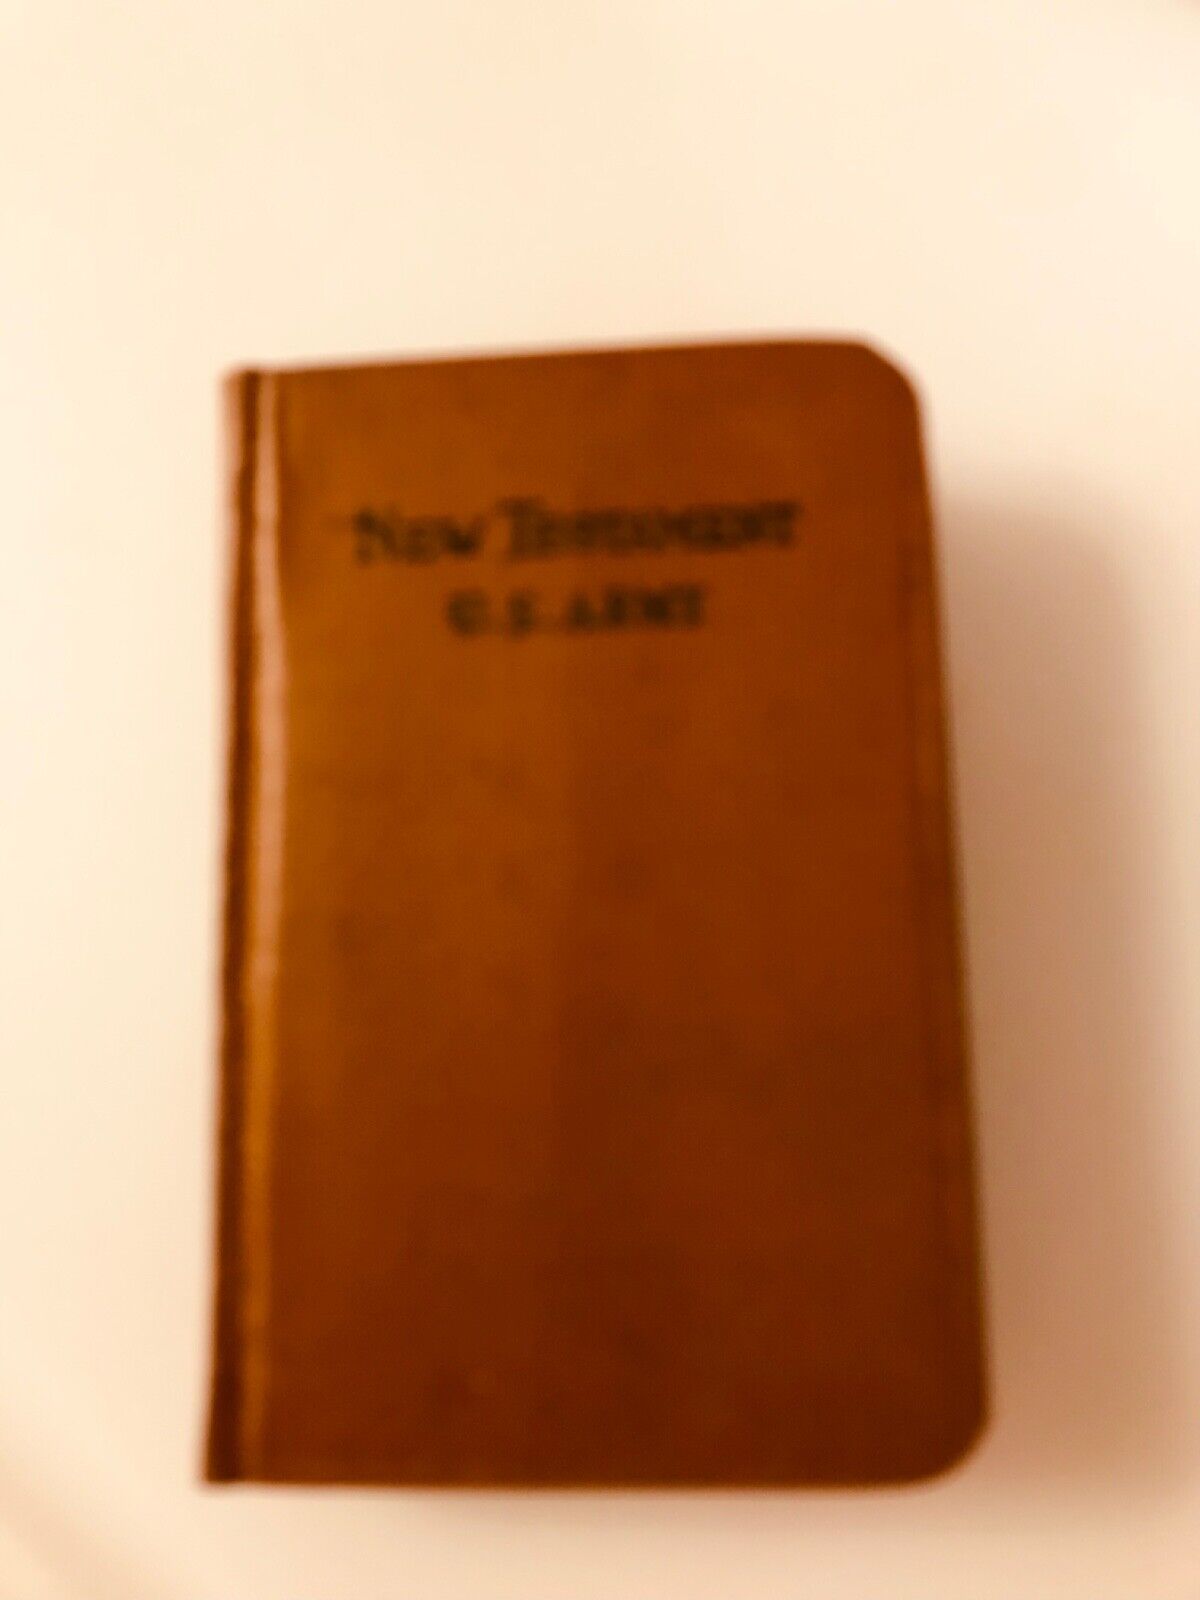 antique/vintage New Testament US Army military collectible  pocket bible